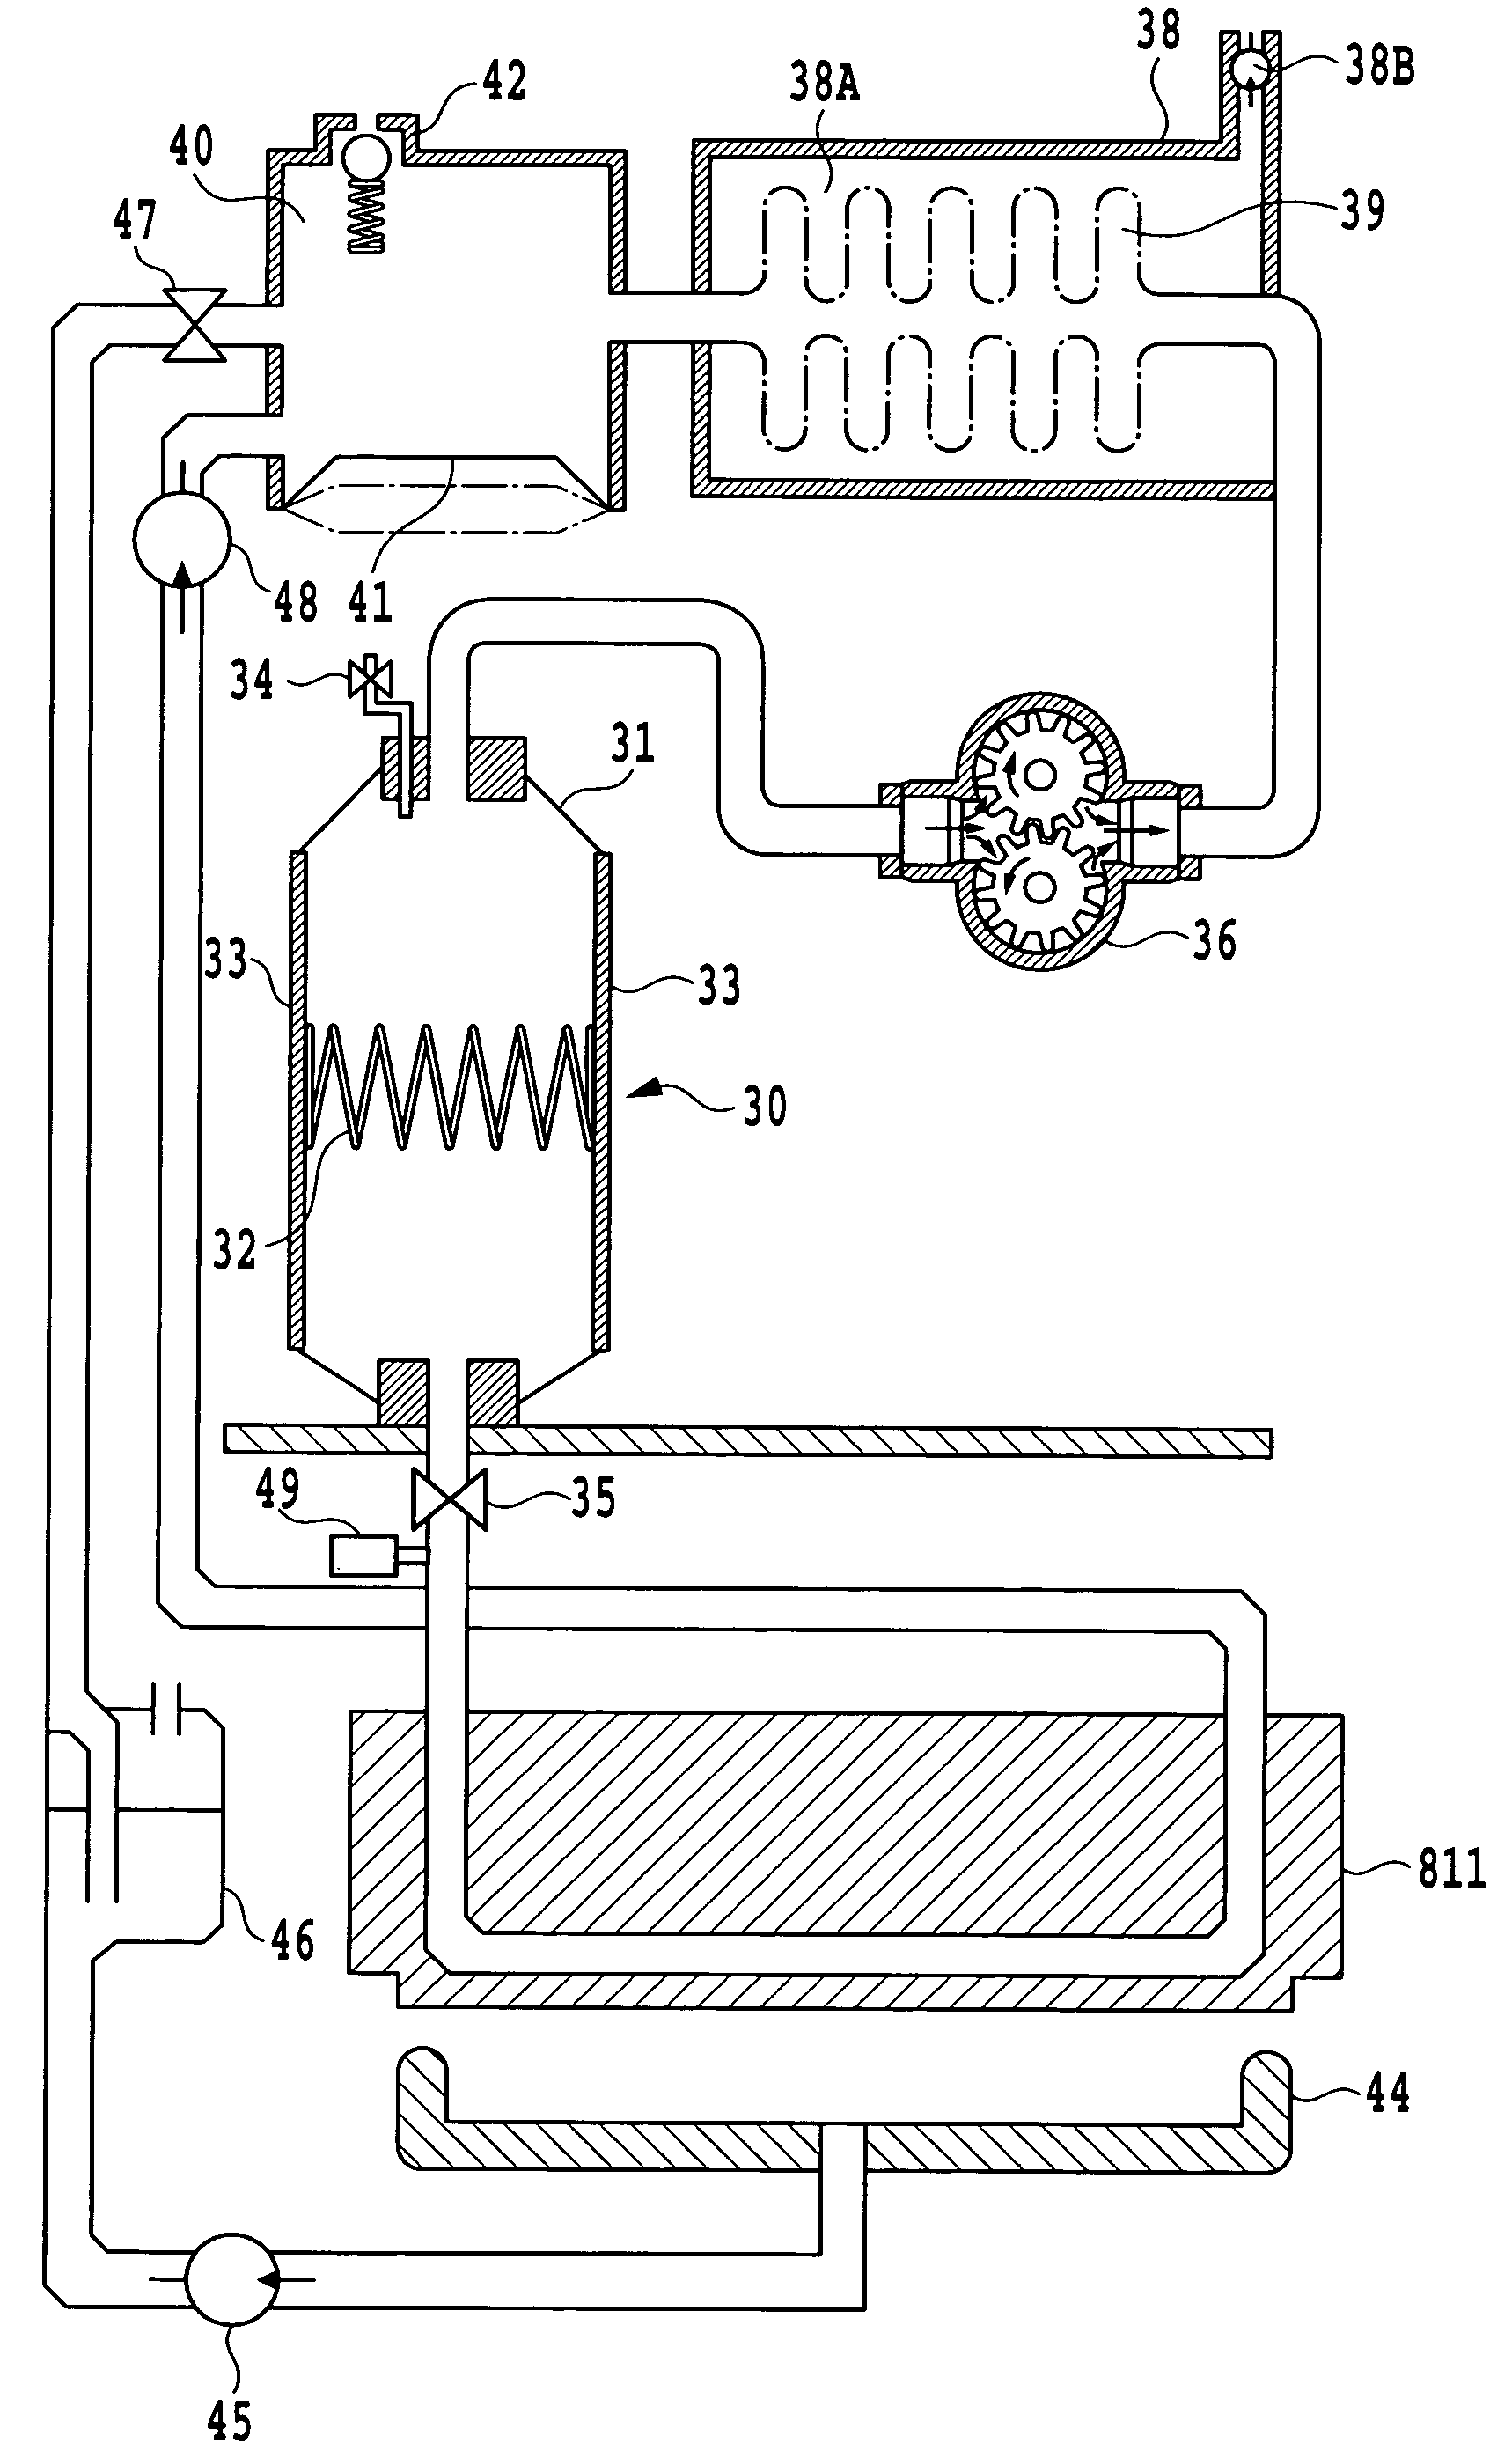 Ink supply apparatus and method for controlling the ink pressure in a print head